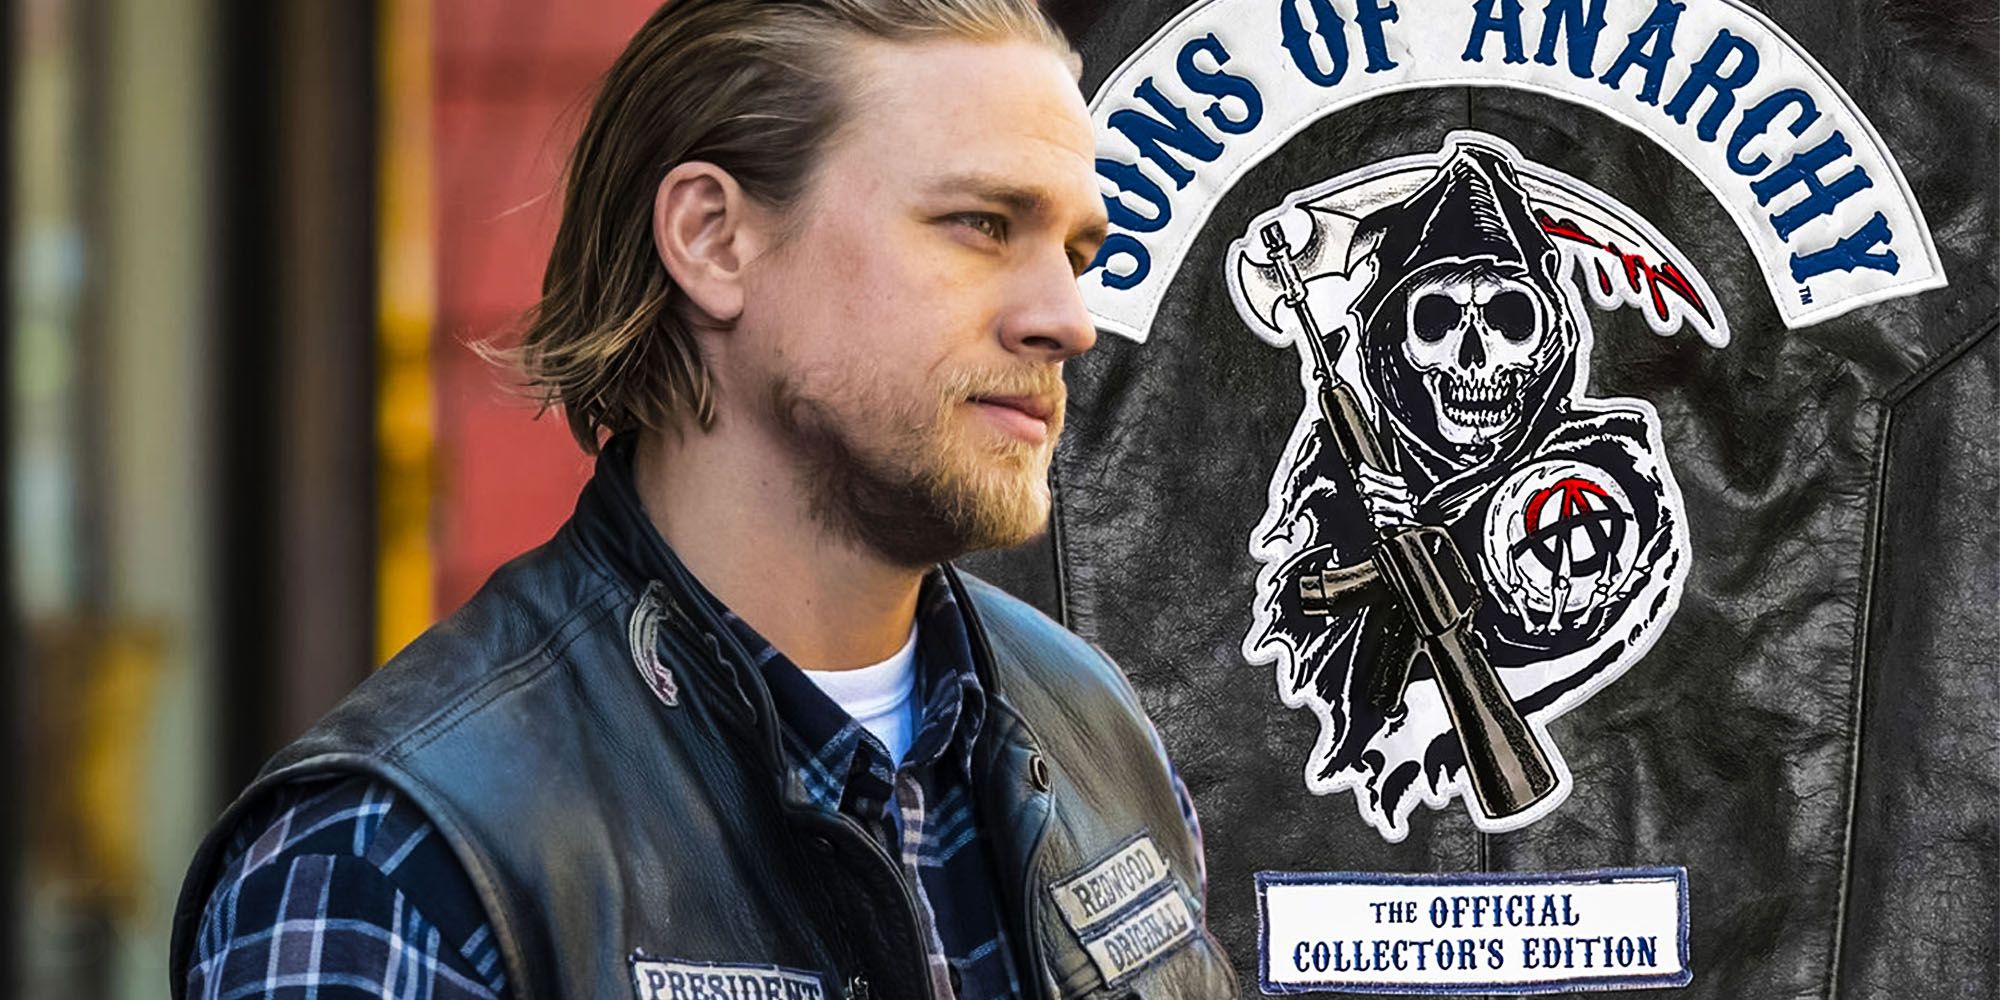 Sons of Anarchy spoiled own finale jaxs death before it released